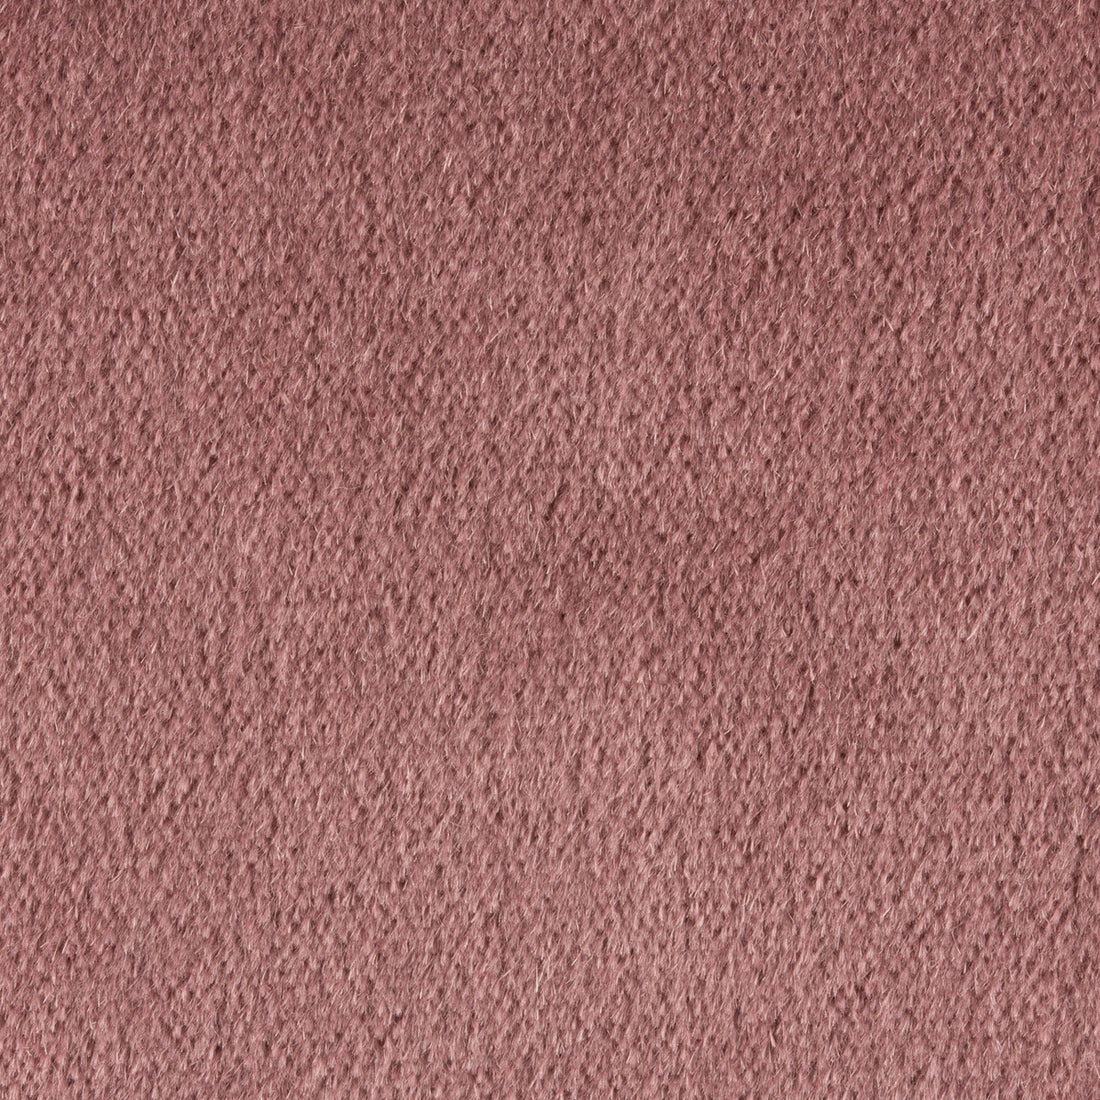 Plazzo Mohair fabric in dusty rose color - pattern 34259.701.0 - by Kravet Couture